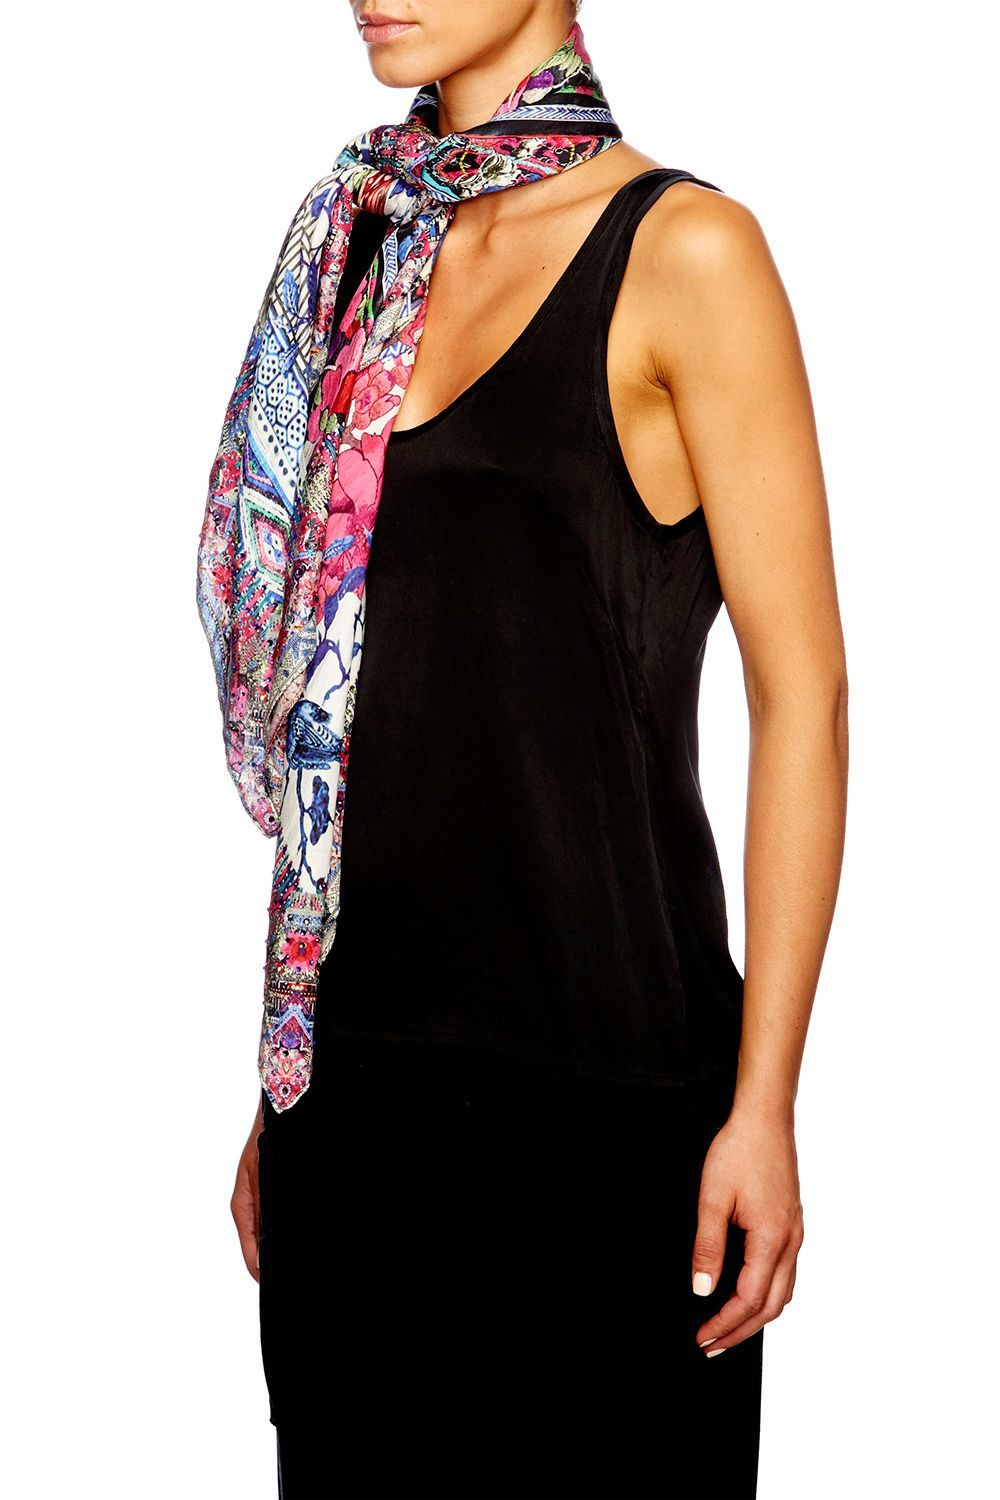 FROM KAILI WITH LOVE LARGE SQUARE SCARF